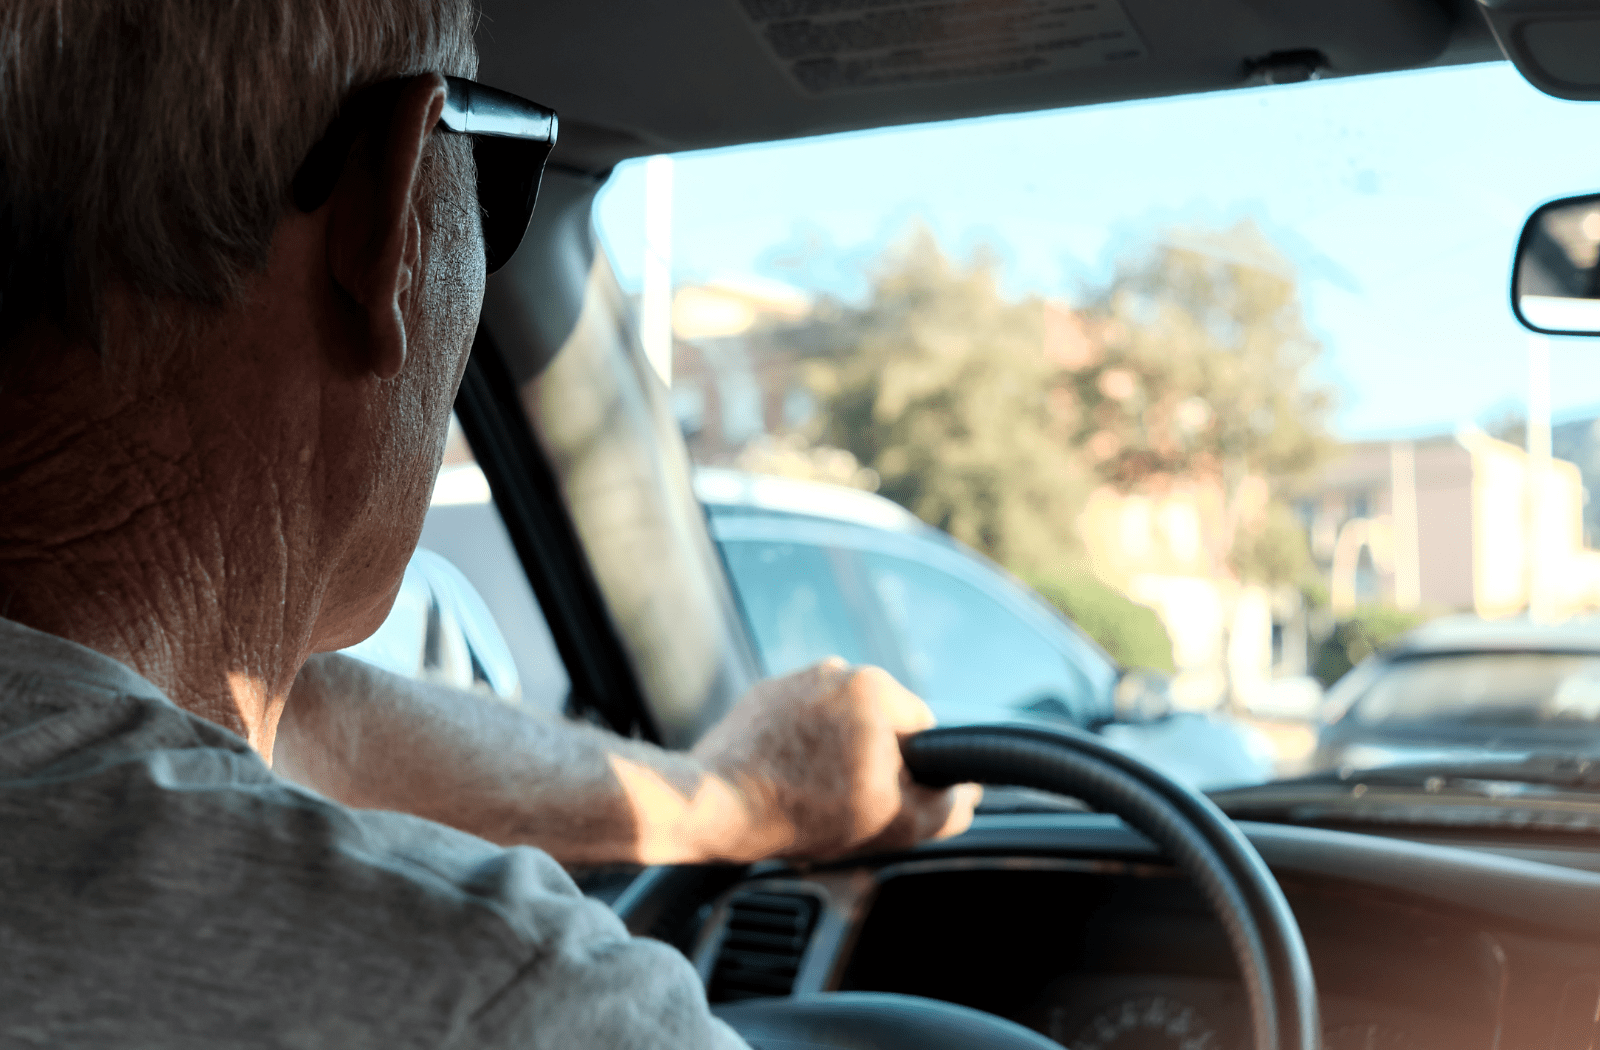 An older man driving a car in the city, traffic around him